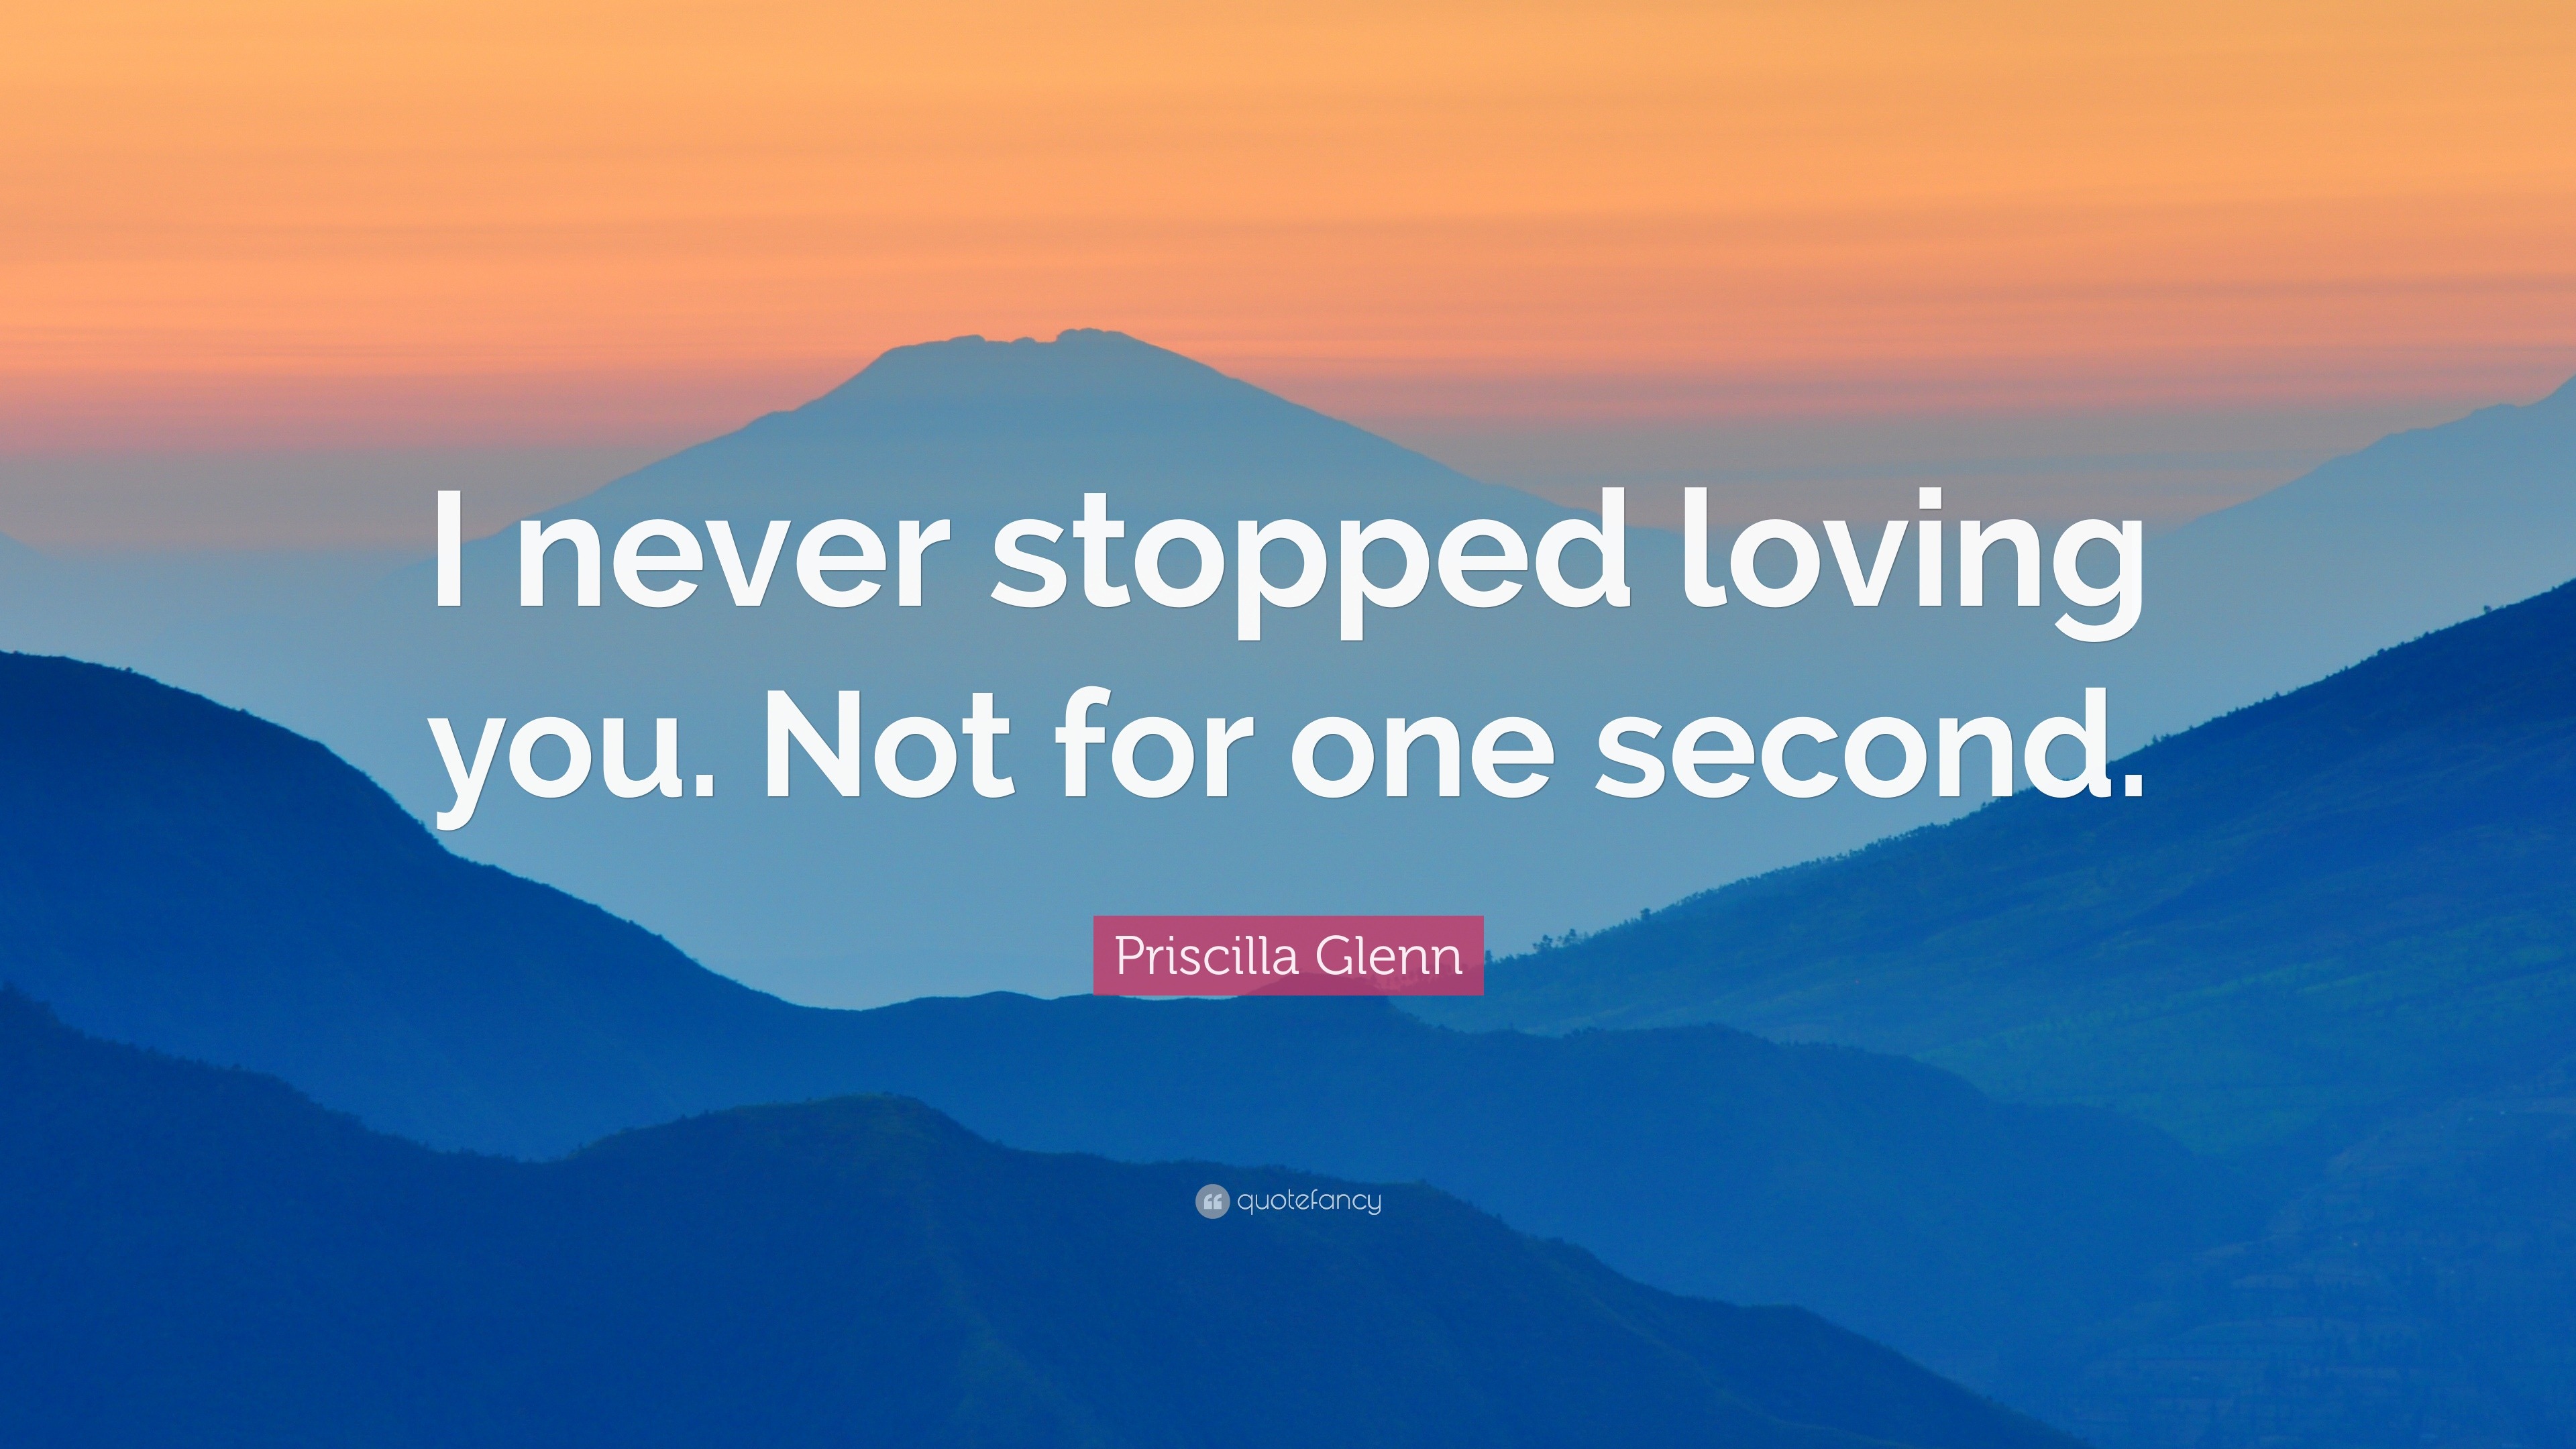 Priscilla Glenn Quote “I never stopped loving you Not for one second